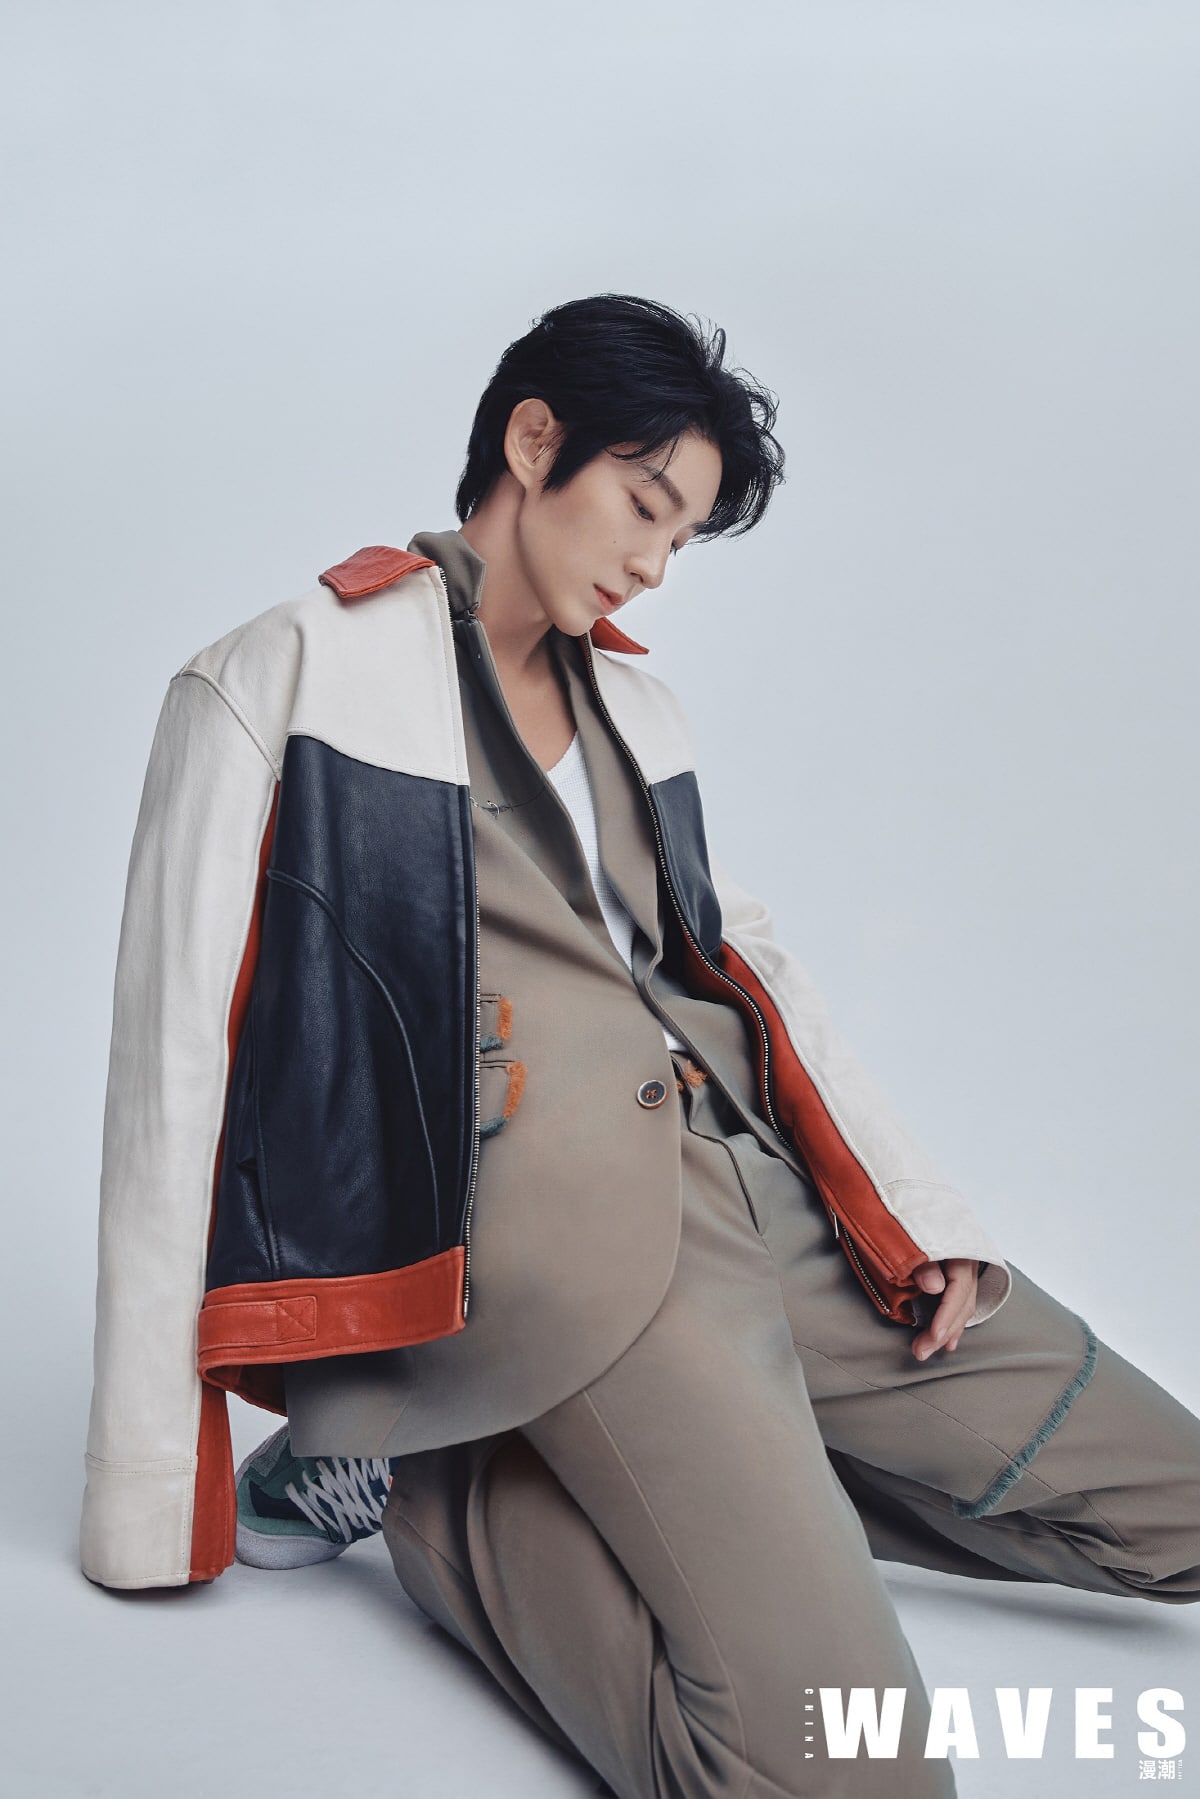 lee-joon-gi-talks-about-selecting-his-next-project-and-more-2